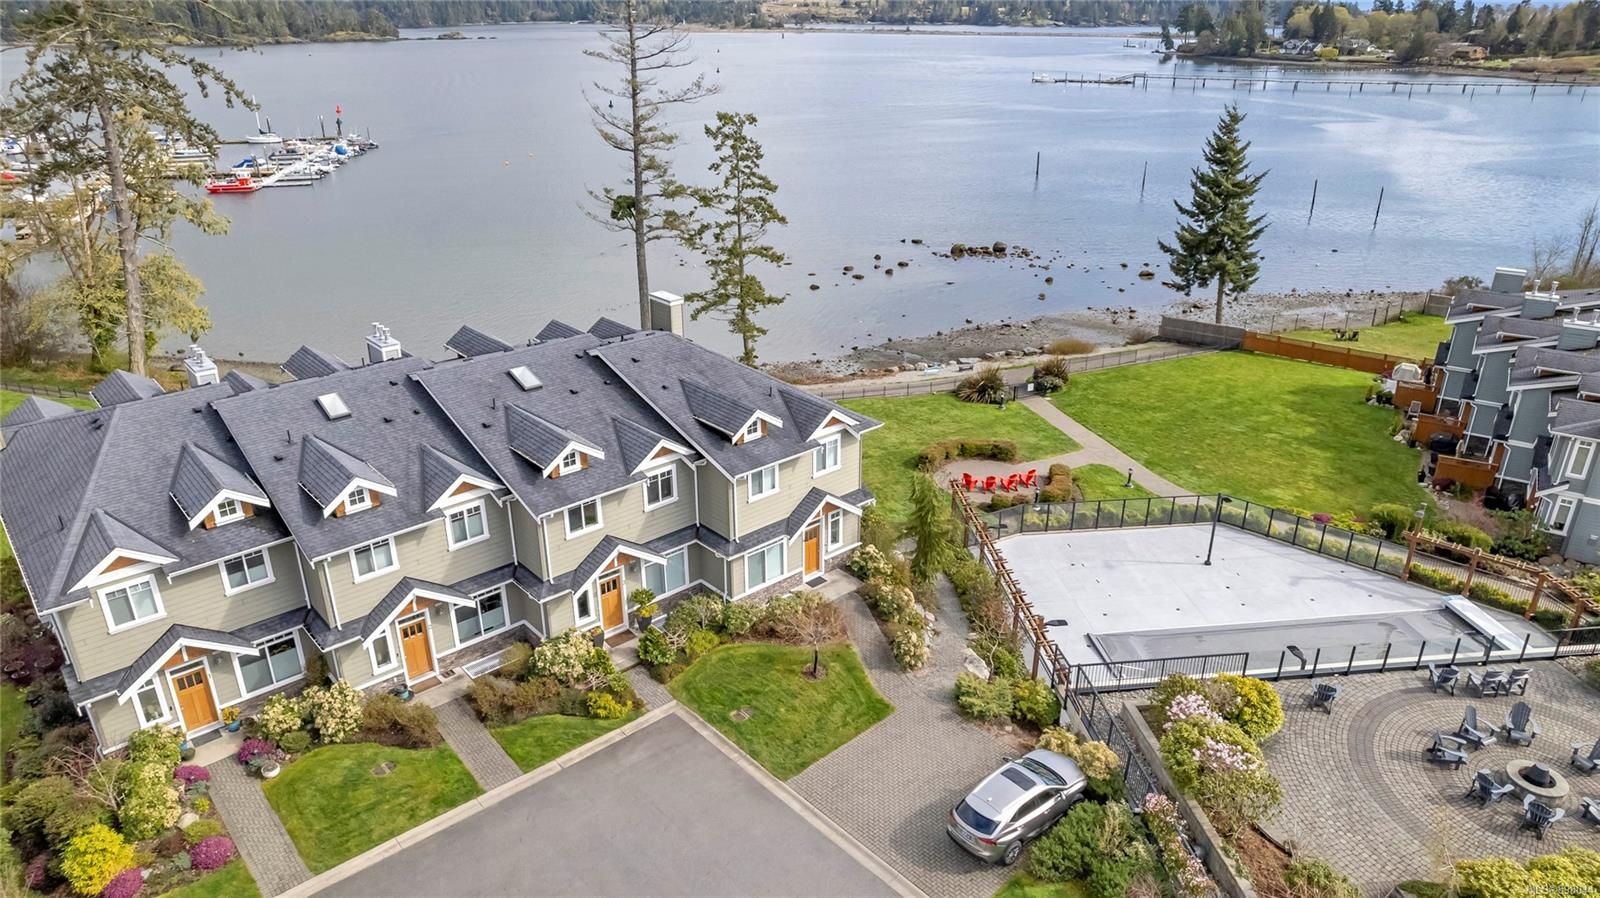 Open House. Open House on Saturday, June 18, 2022 12:00PM - 2:00PM
Oceanfront Sooke Townhouse with 4 bedrooms and 4 bathrooms and all the amenities you can imagine. Open house this Saturday from 12-2. Priced to sell so Come see your new Waterfront home in